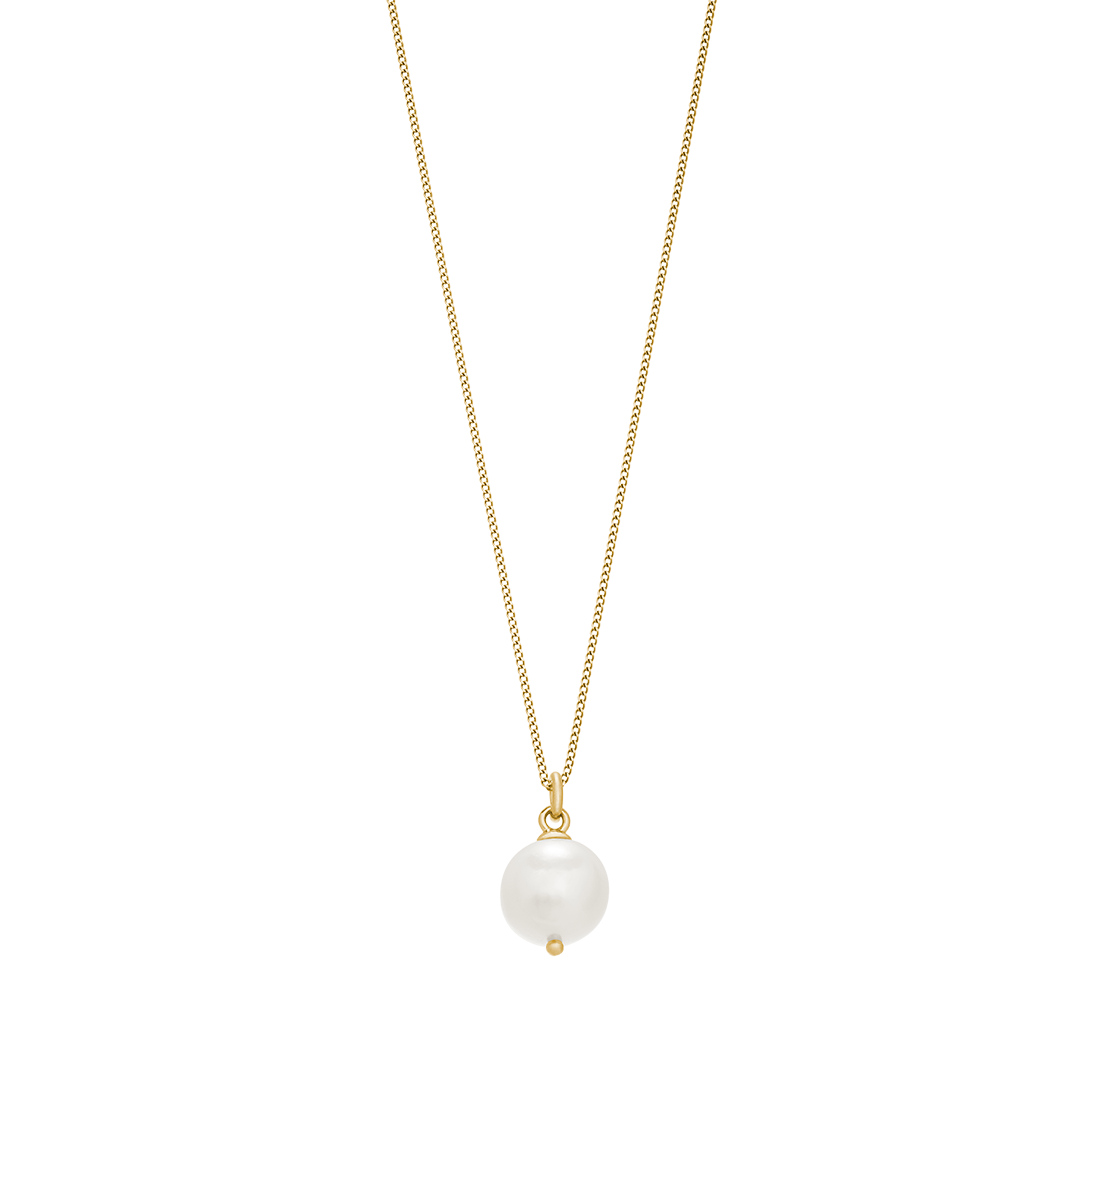 LARGE FRESHWATER PEARL NECKLACE (18K GOLD VERMEIL) - IMAGE 1